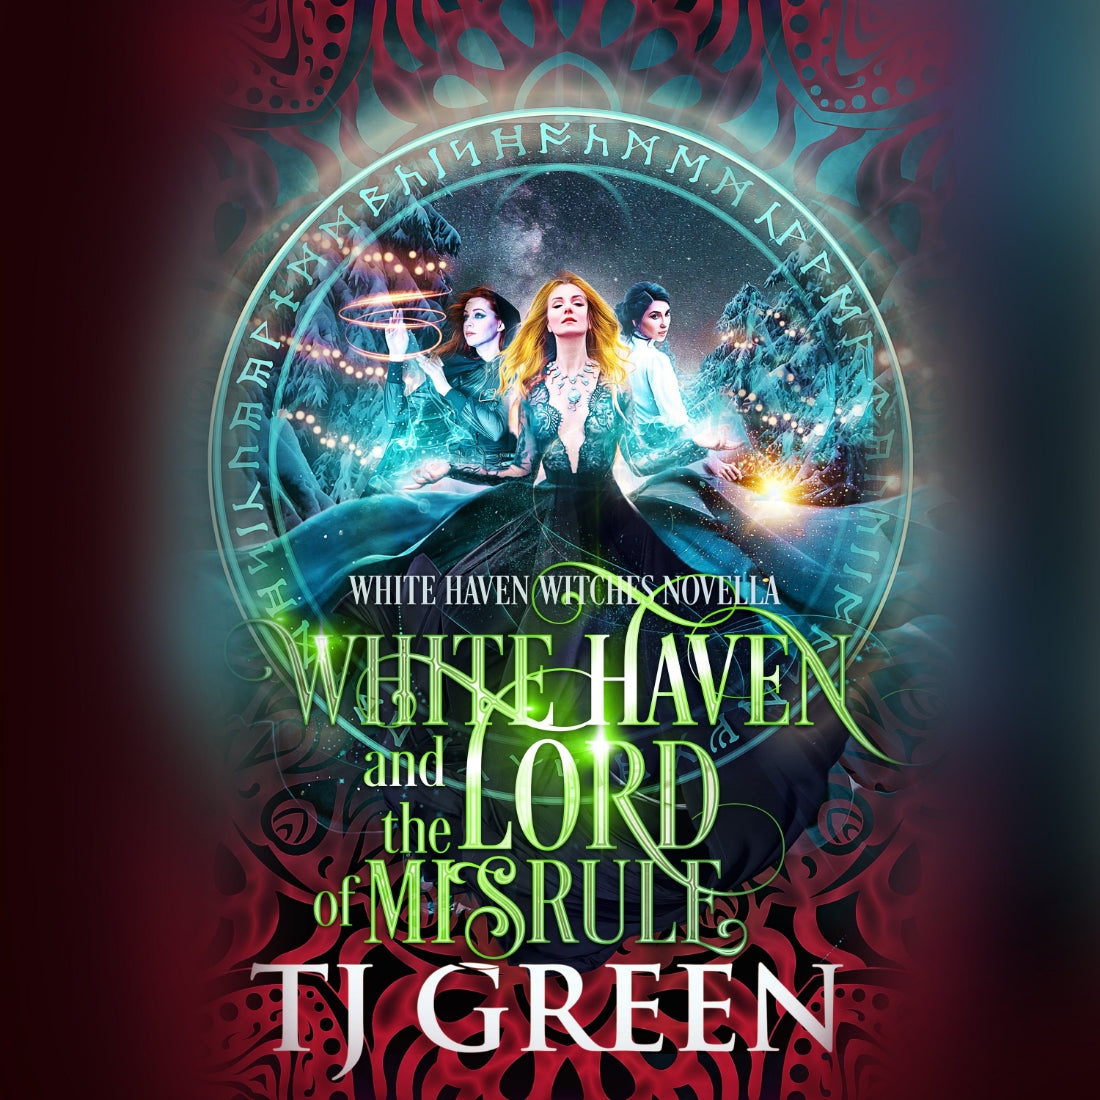 White Haven and the Lord of Misrule: White Haven Witches Yuletide Novella (AUDIOBOOK)